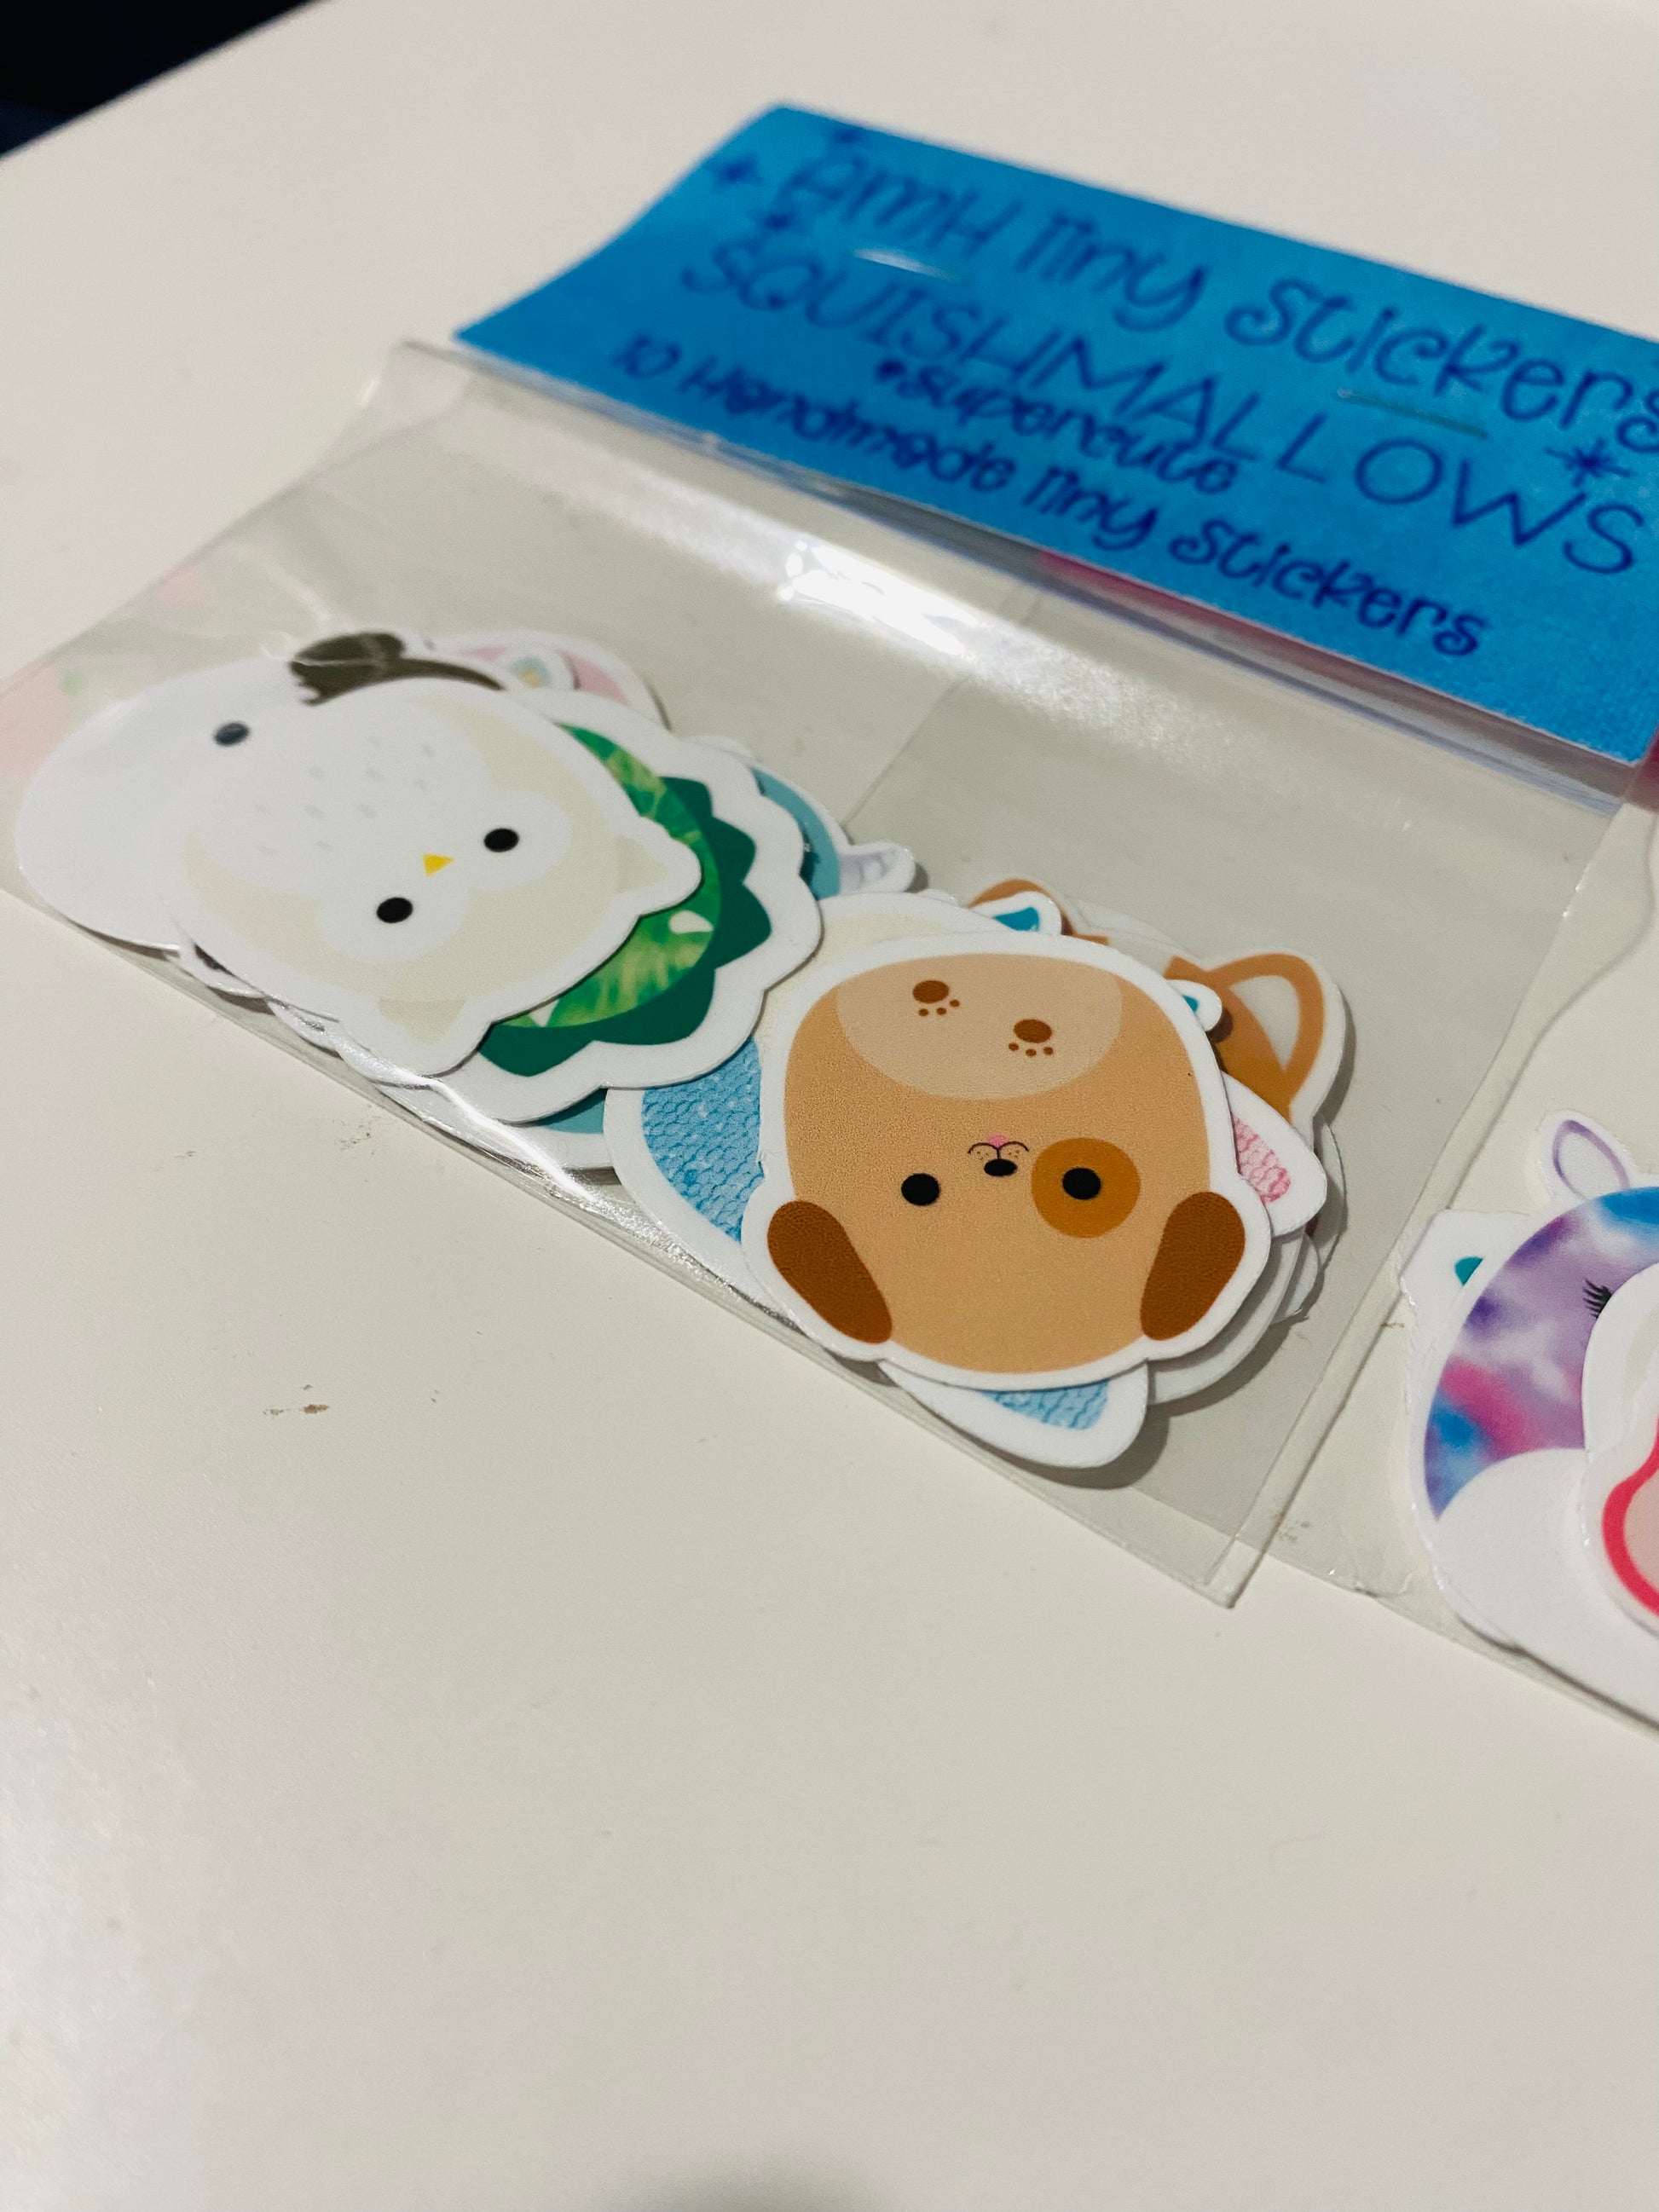 Tiny Stickers - Squishmallows – Affirm My Way